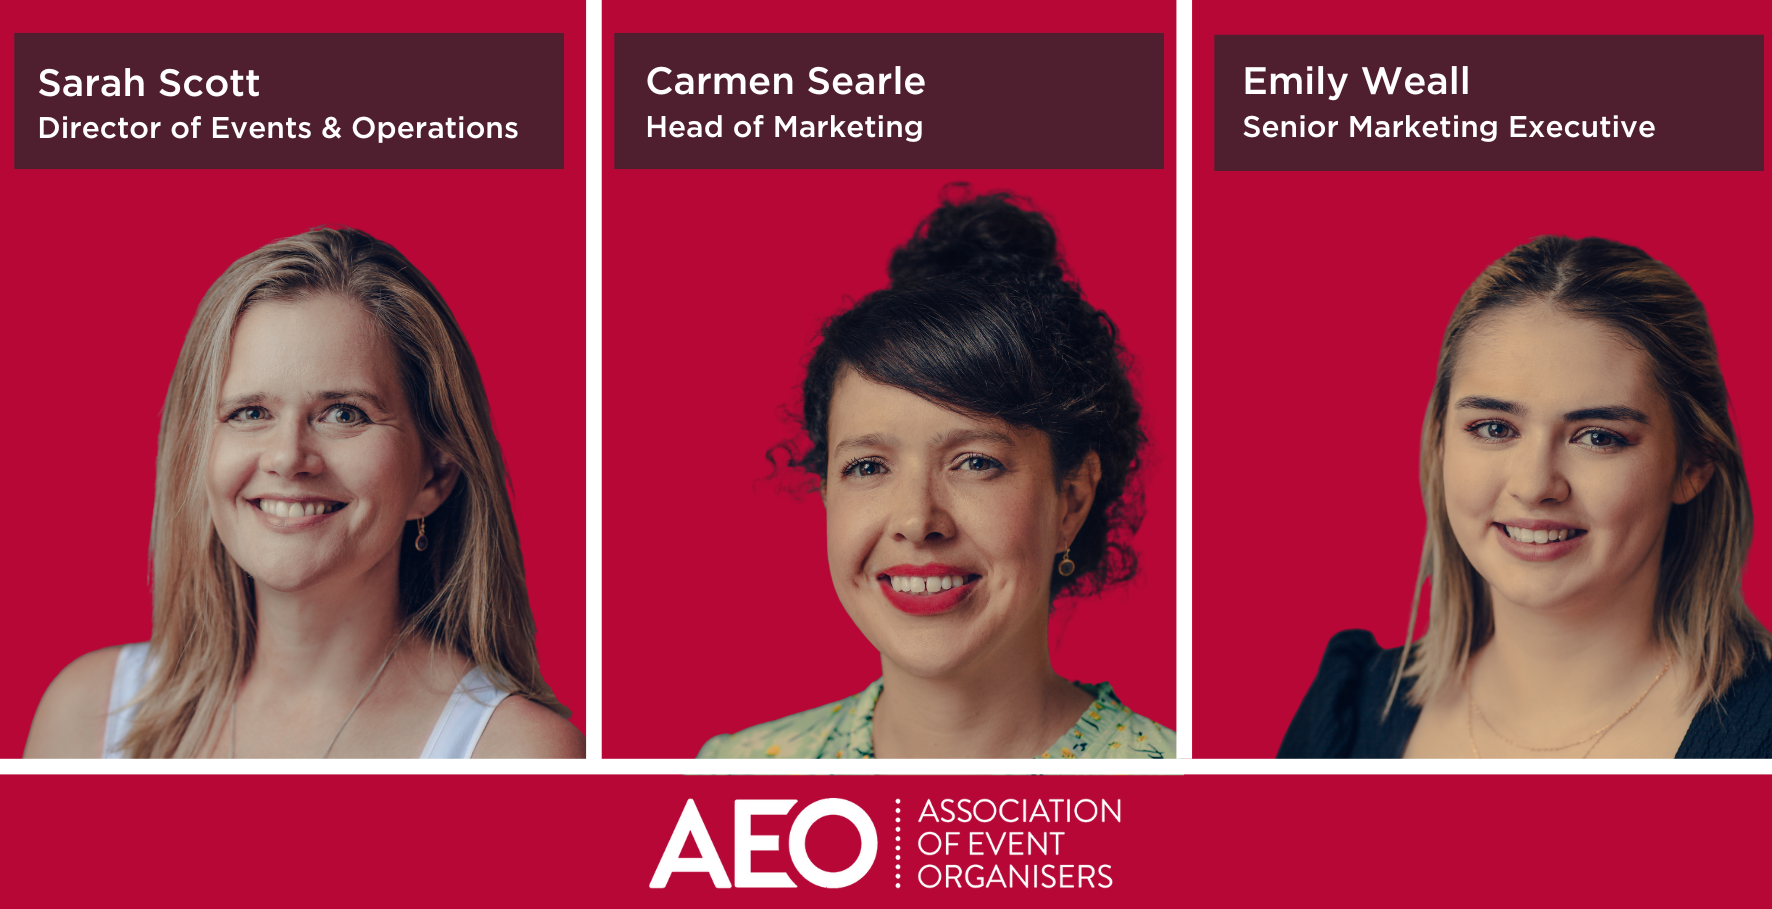 AEO ANNOUNCES EMPLOYEE PROMOTIONS